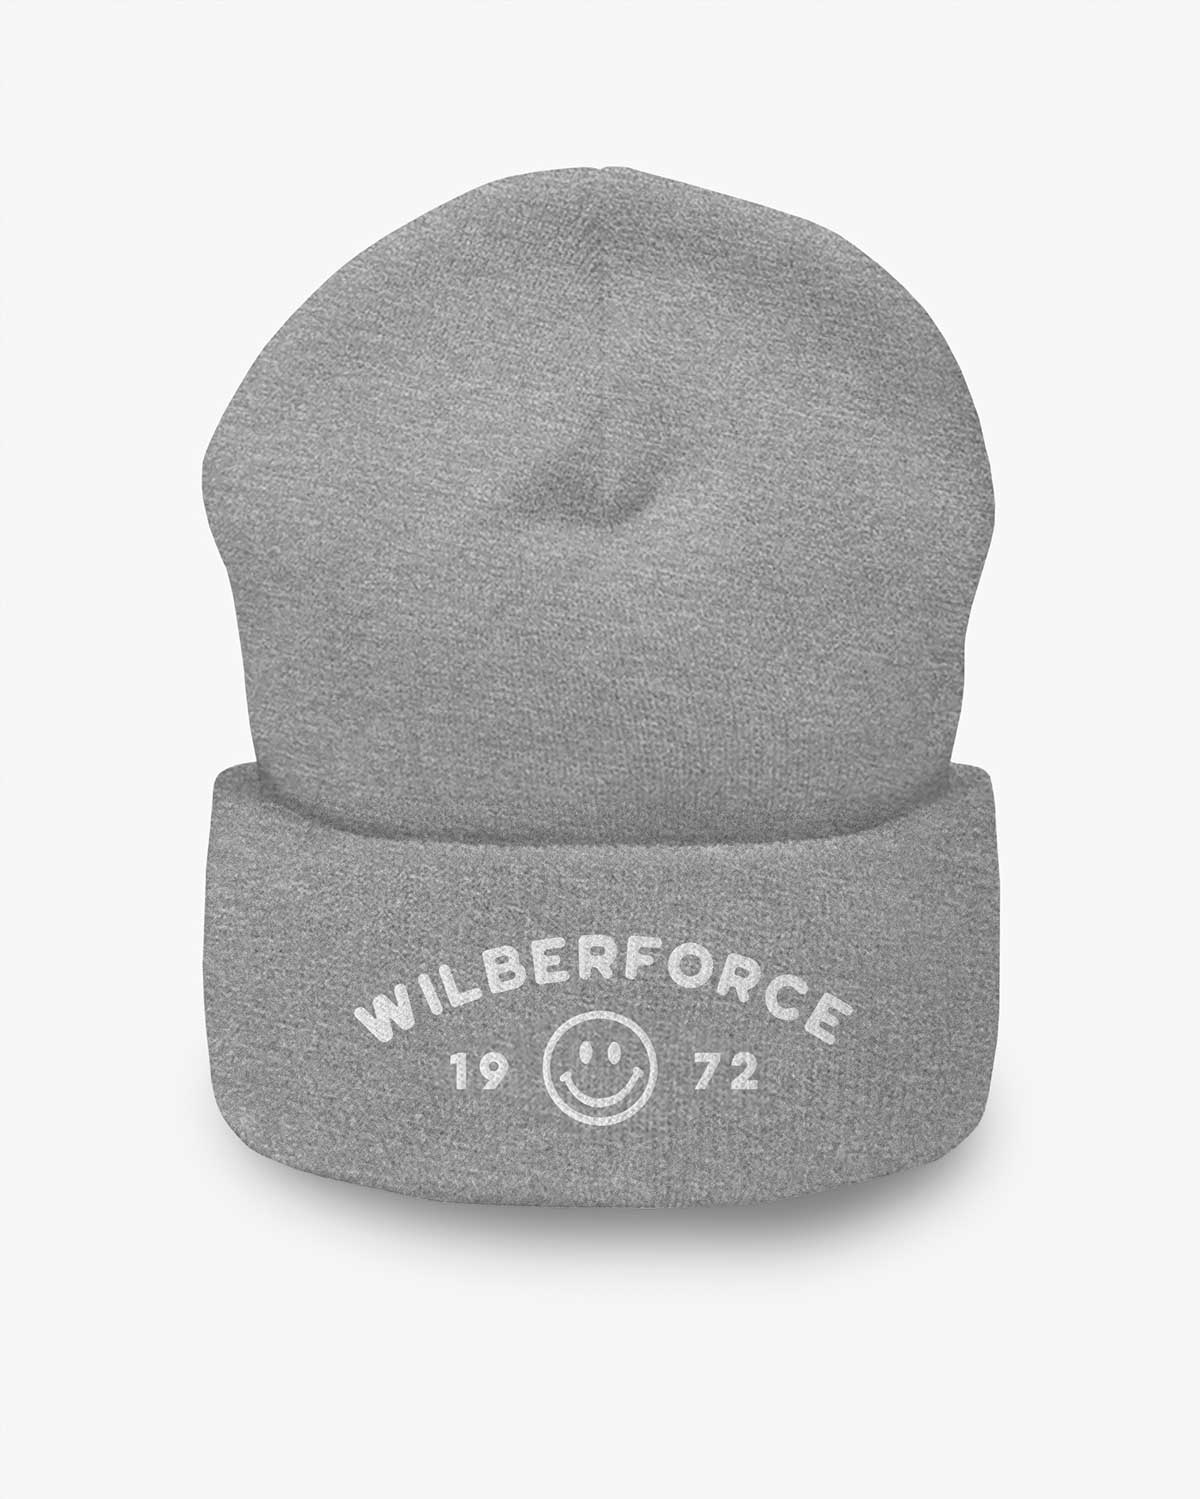 Smiley - Wilberforce - Toque